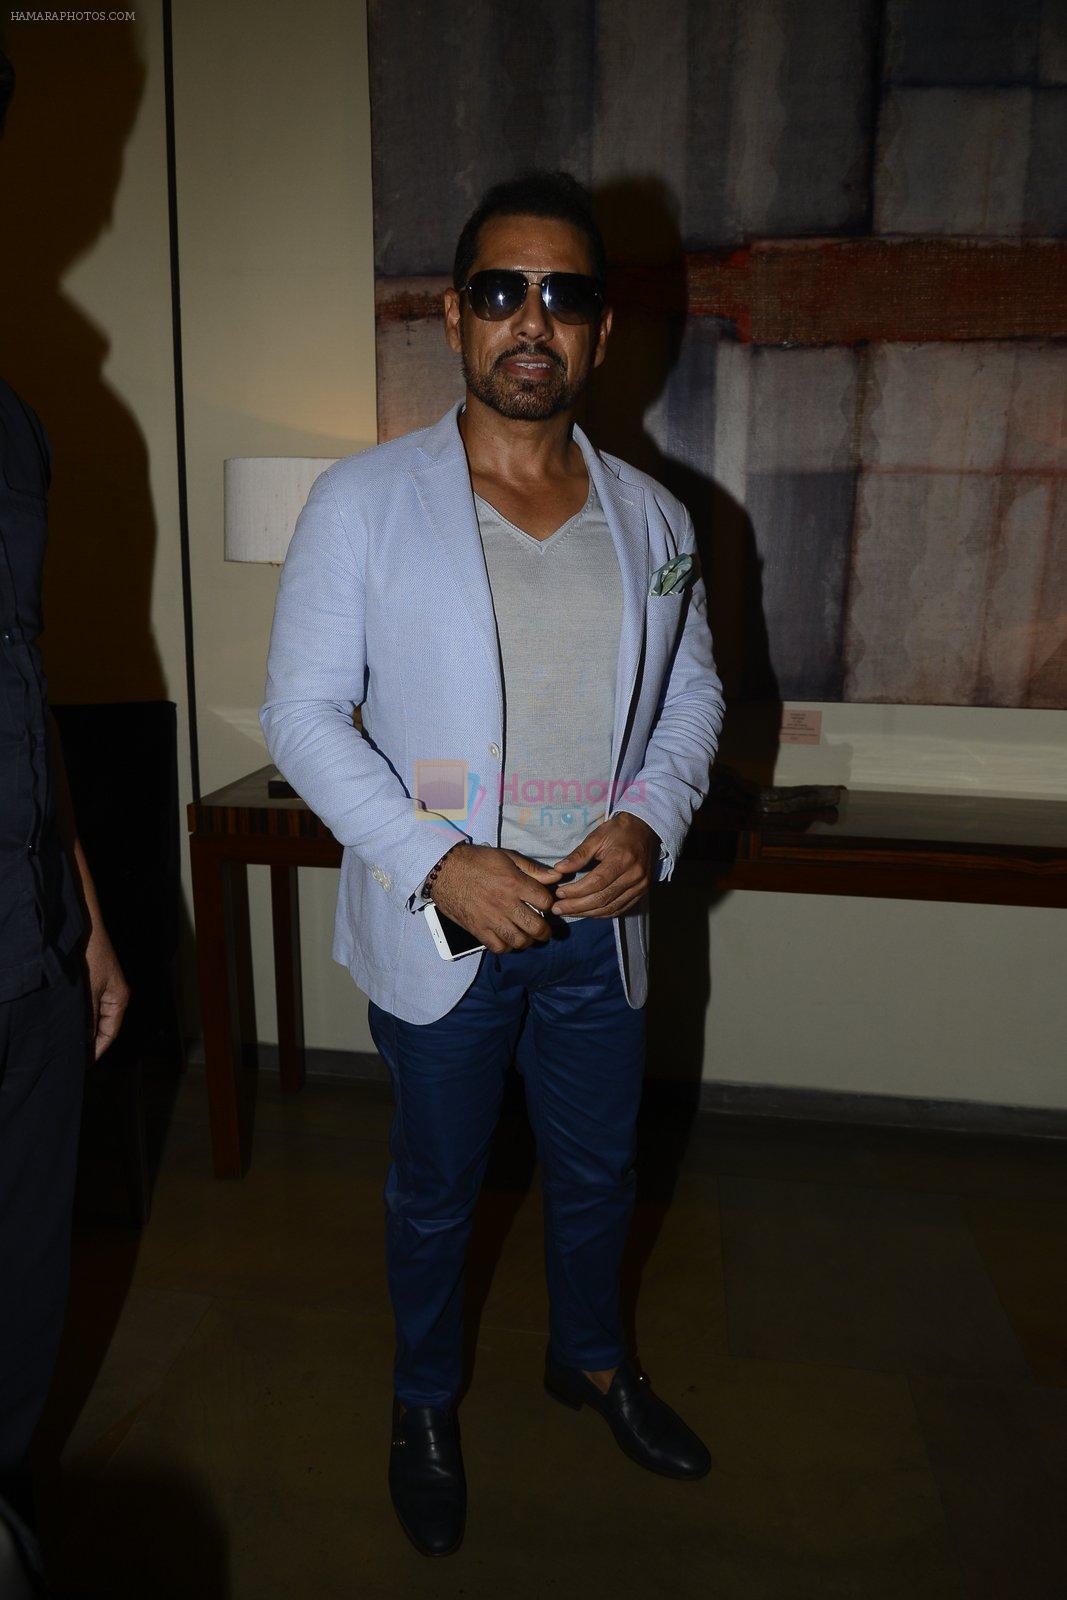 Robert Vadra during Manav Gangwani latest collection Begum-e-Jannat at the FDCI India Couture Week 2016 on 24 July 2016